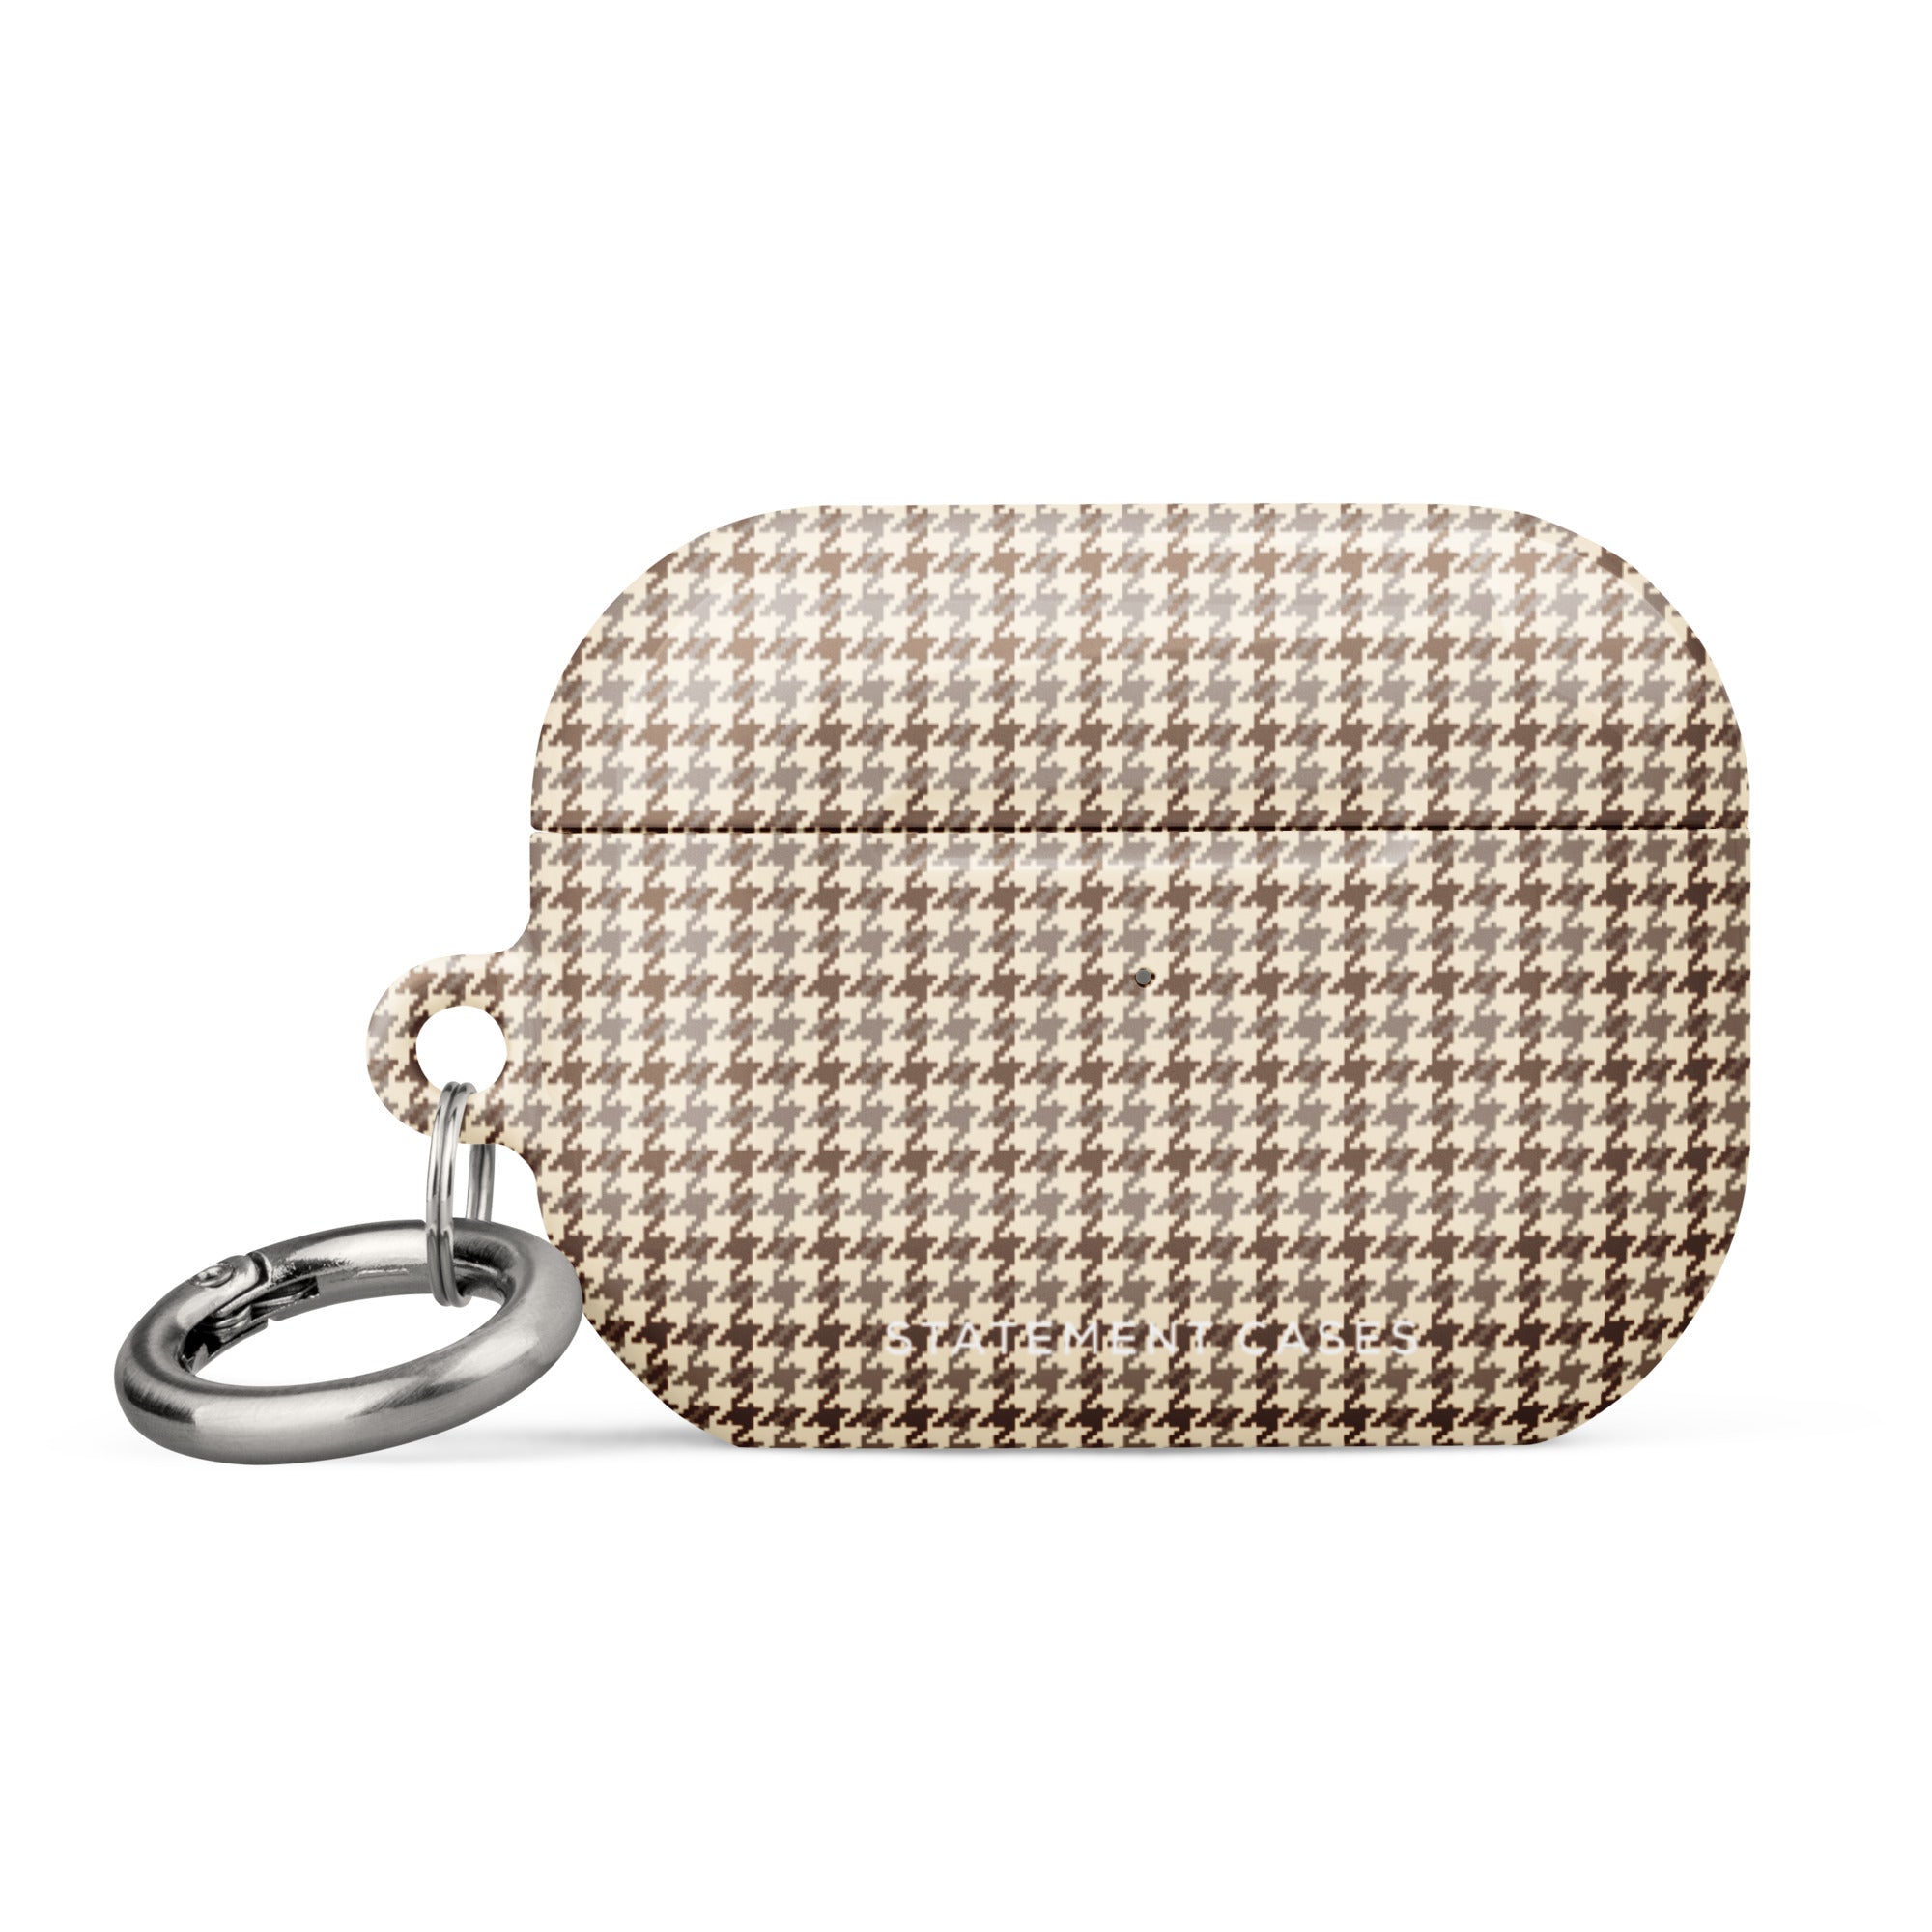 A houndstooth patterned AirPods® case with a metal carabiner attachment on the left side. The case boasts a beige and brown checkered design and features premium impact-absorbing materials for added protection. Introducing the Classic Houndstooth for AirPods Pro Gen 2 by Statement Cases.